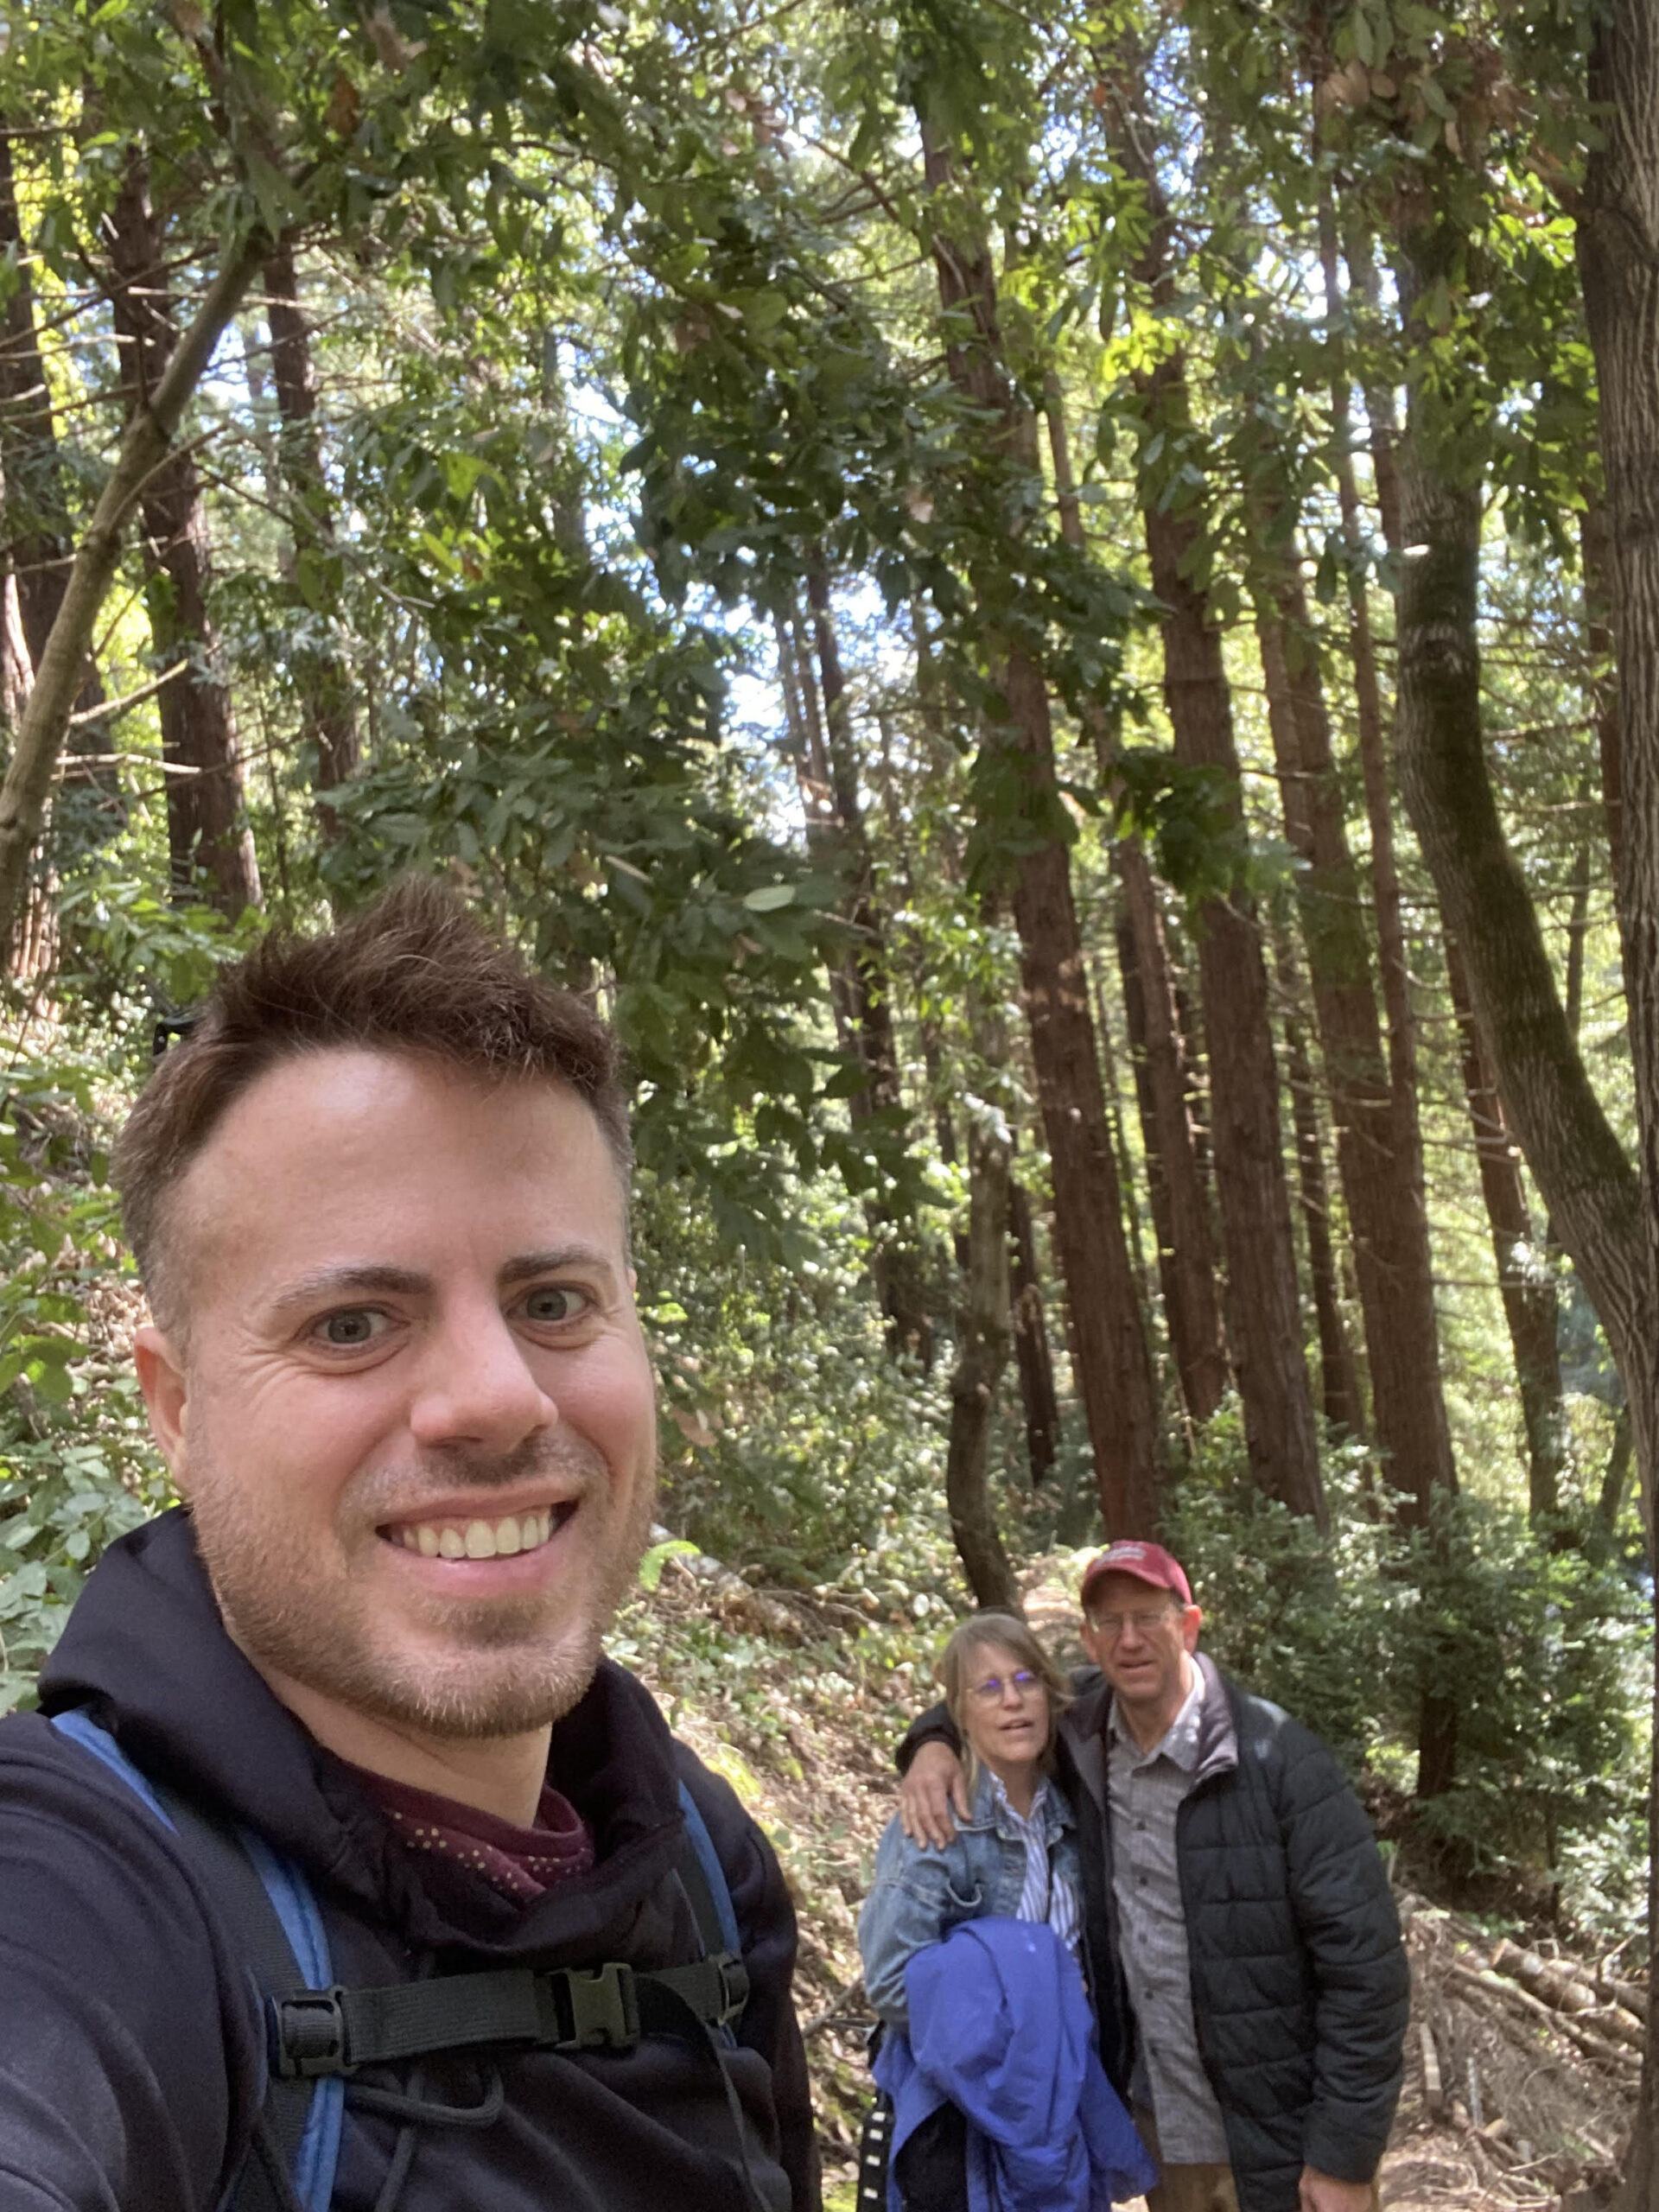 Jordan hiking with his parents in Santa Cruz, CA. They flew in to meet Paul’s family before the couple was married.